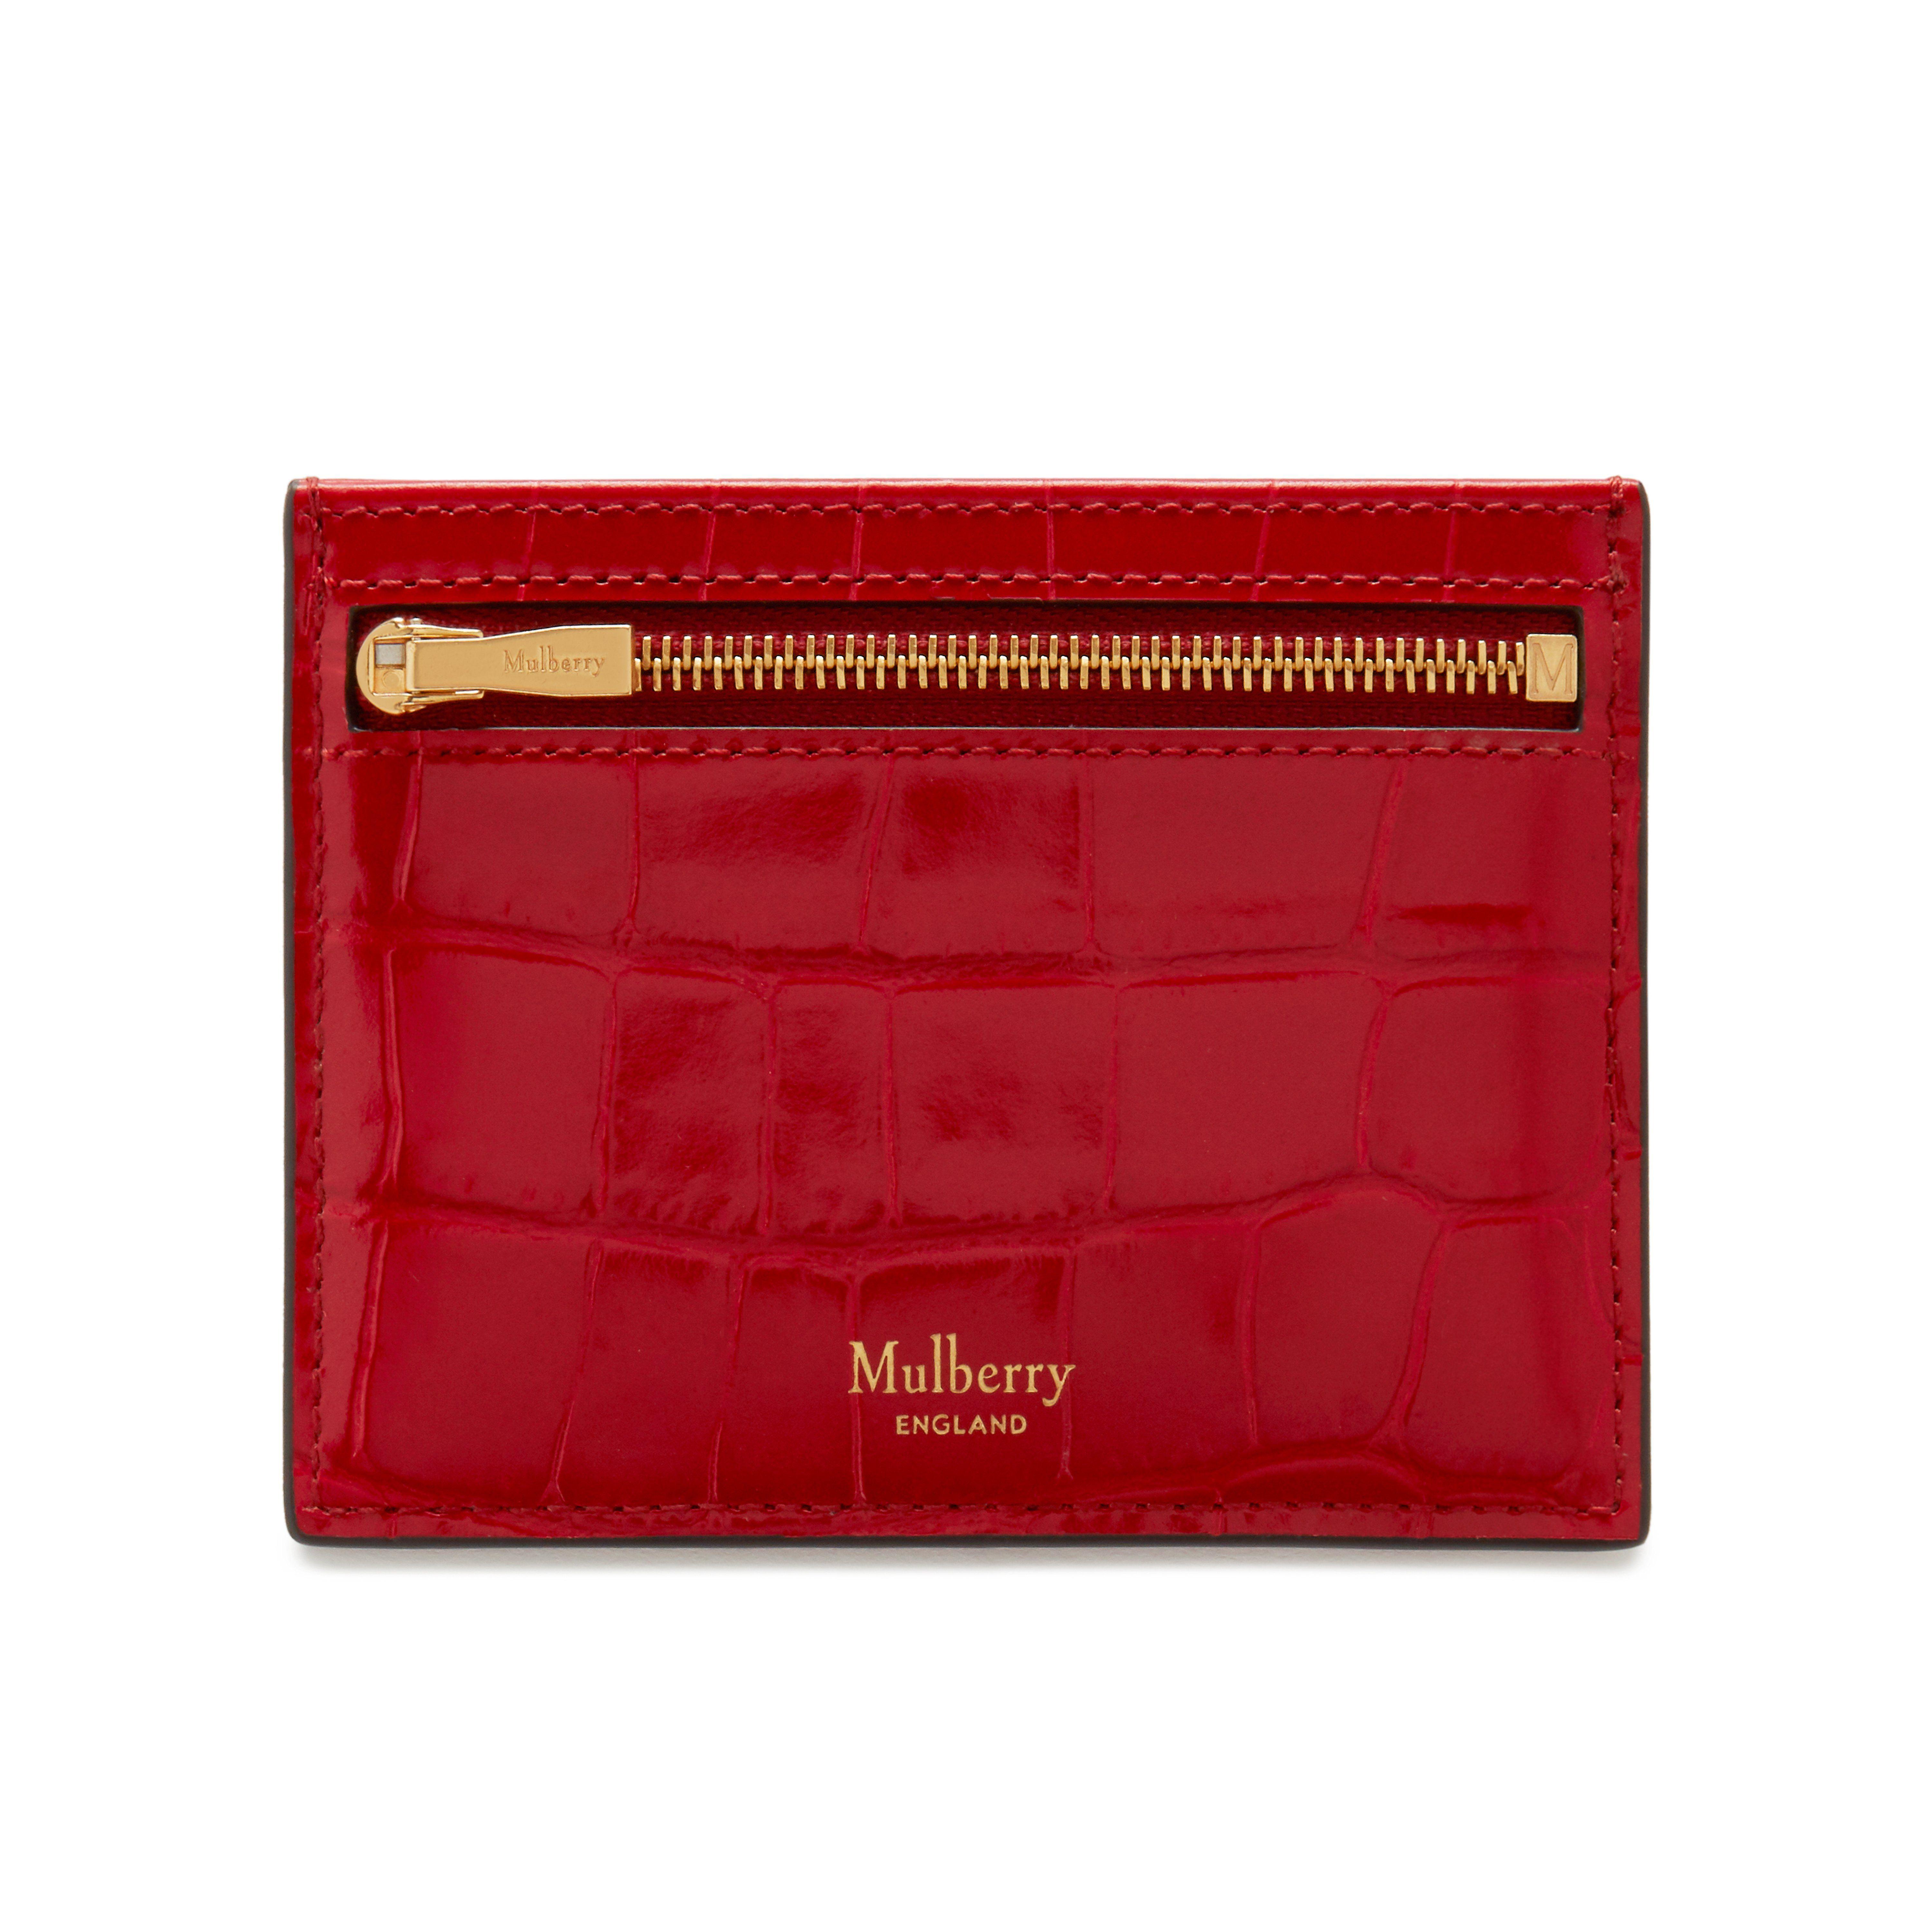 Mulberry Zipped Credit Card Slip In Scarlet Croc Print - Lyst